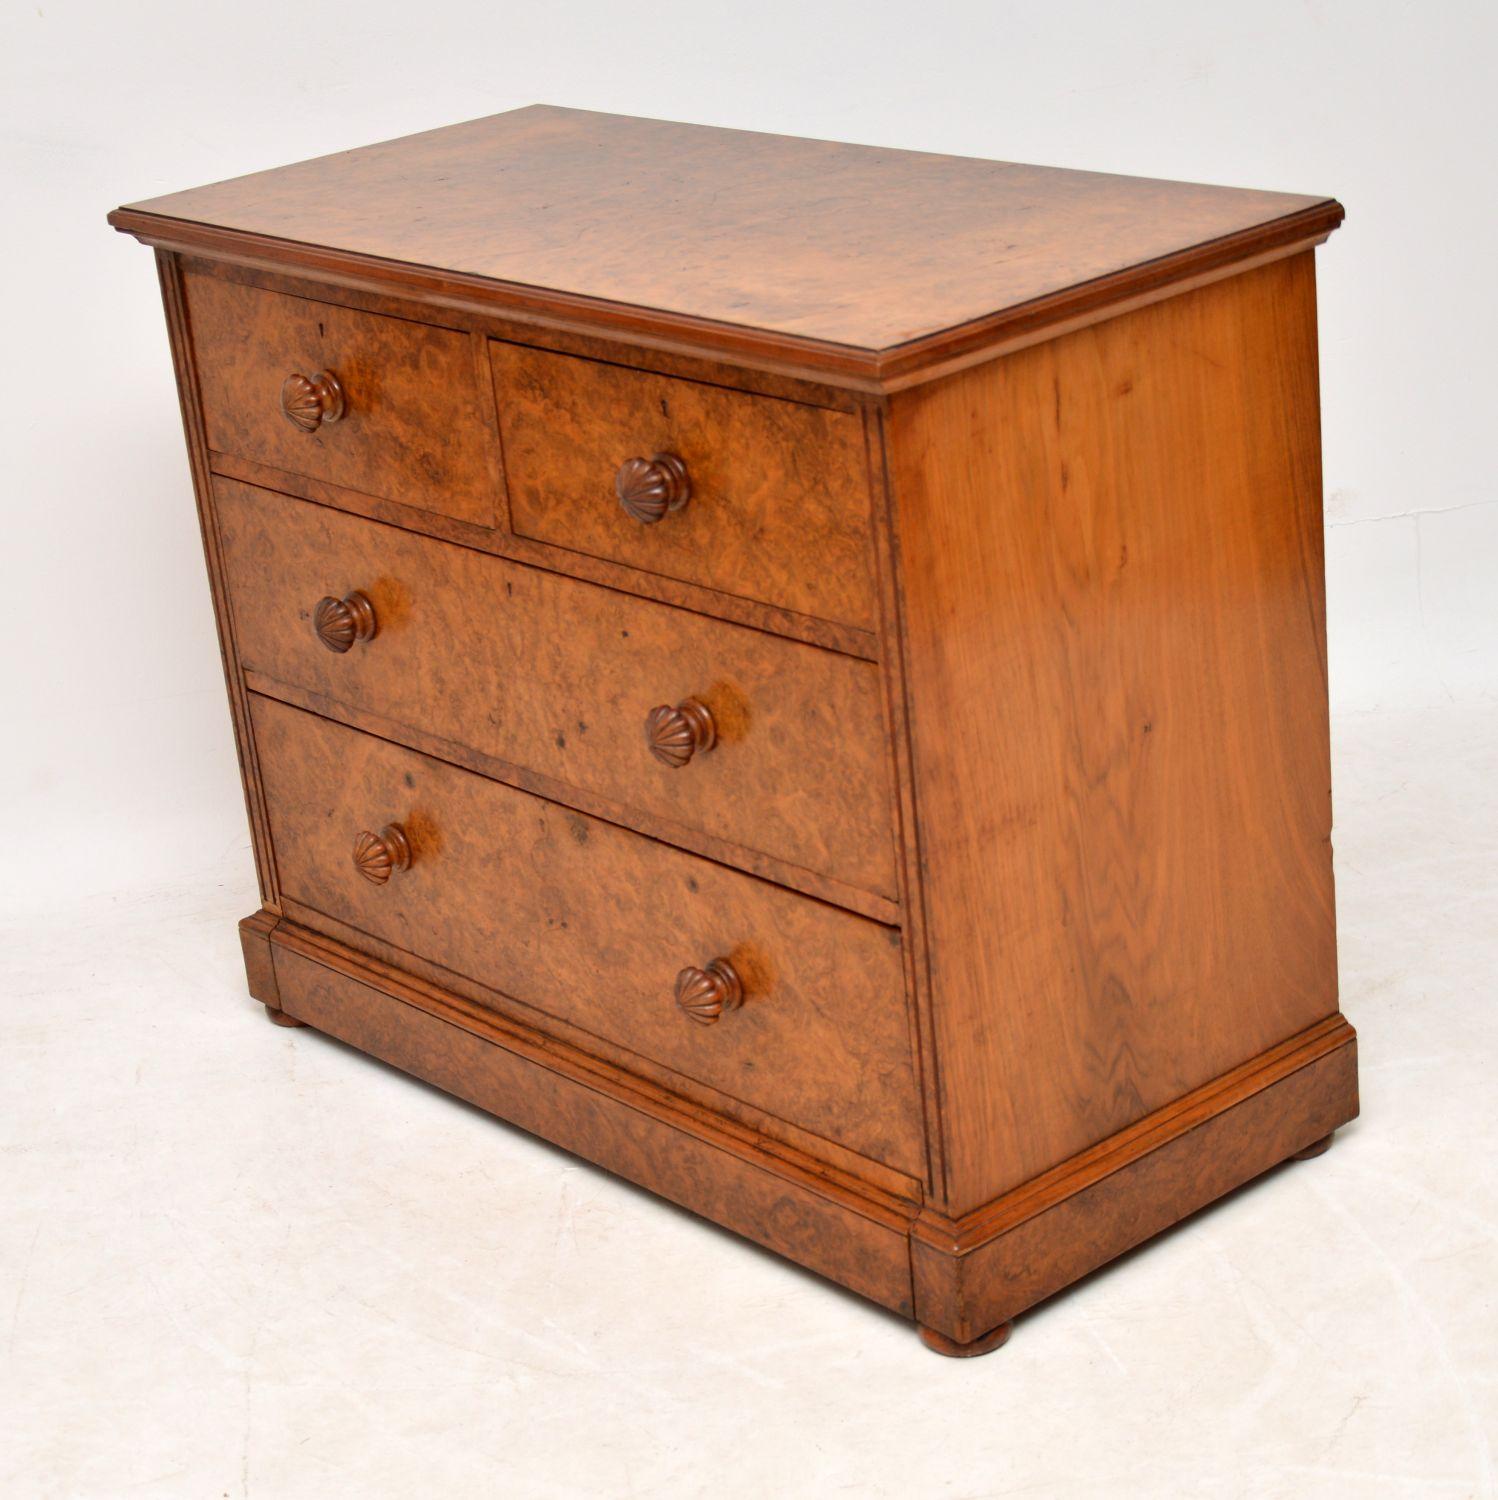 British Antique Victorian Burr Walnut Chest of Drawers by James Shoolbred